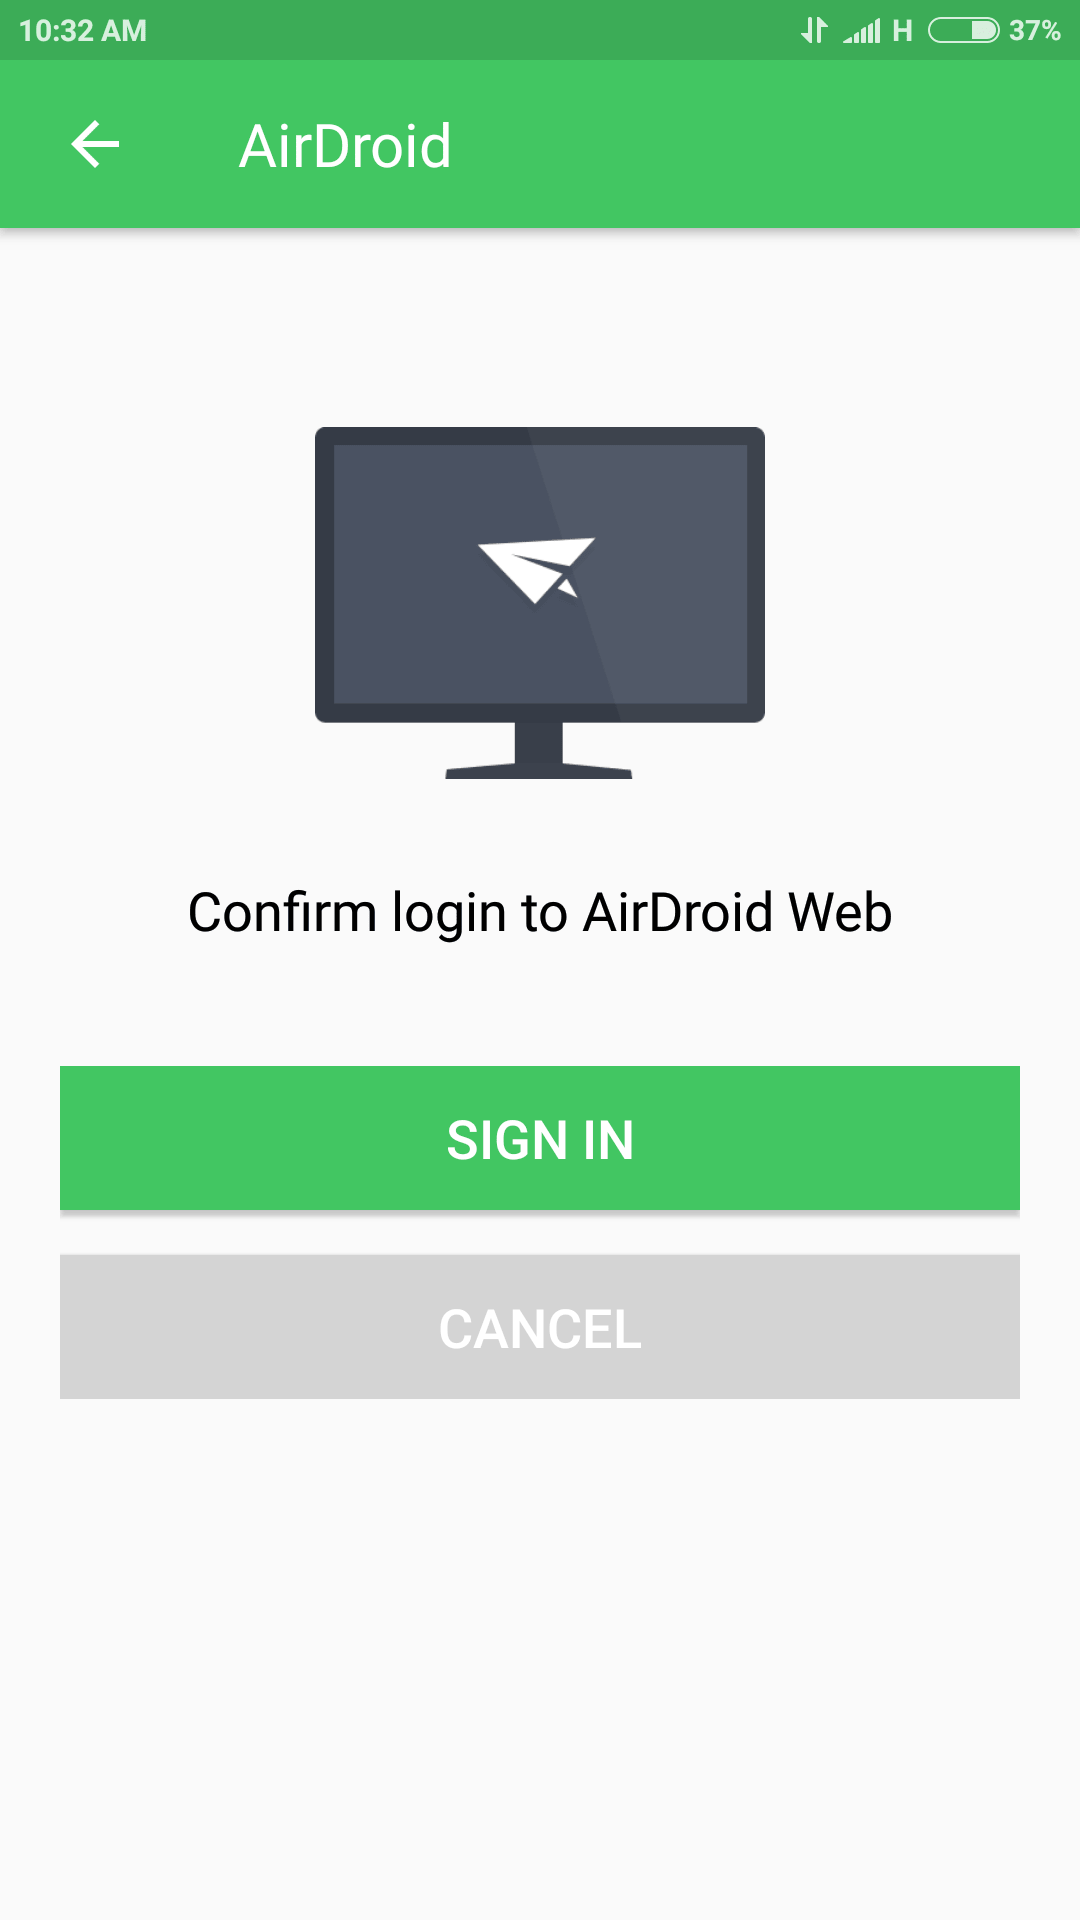 Confirm the Login to AirDroid We